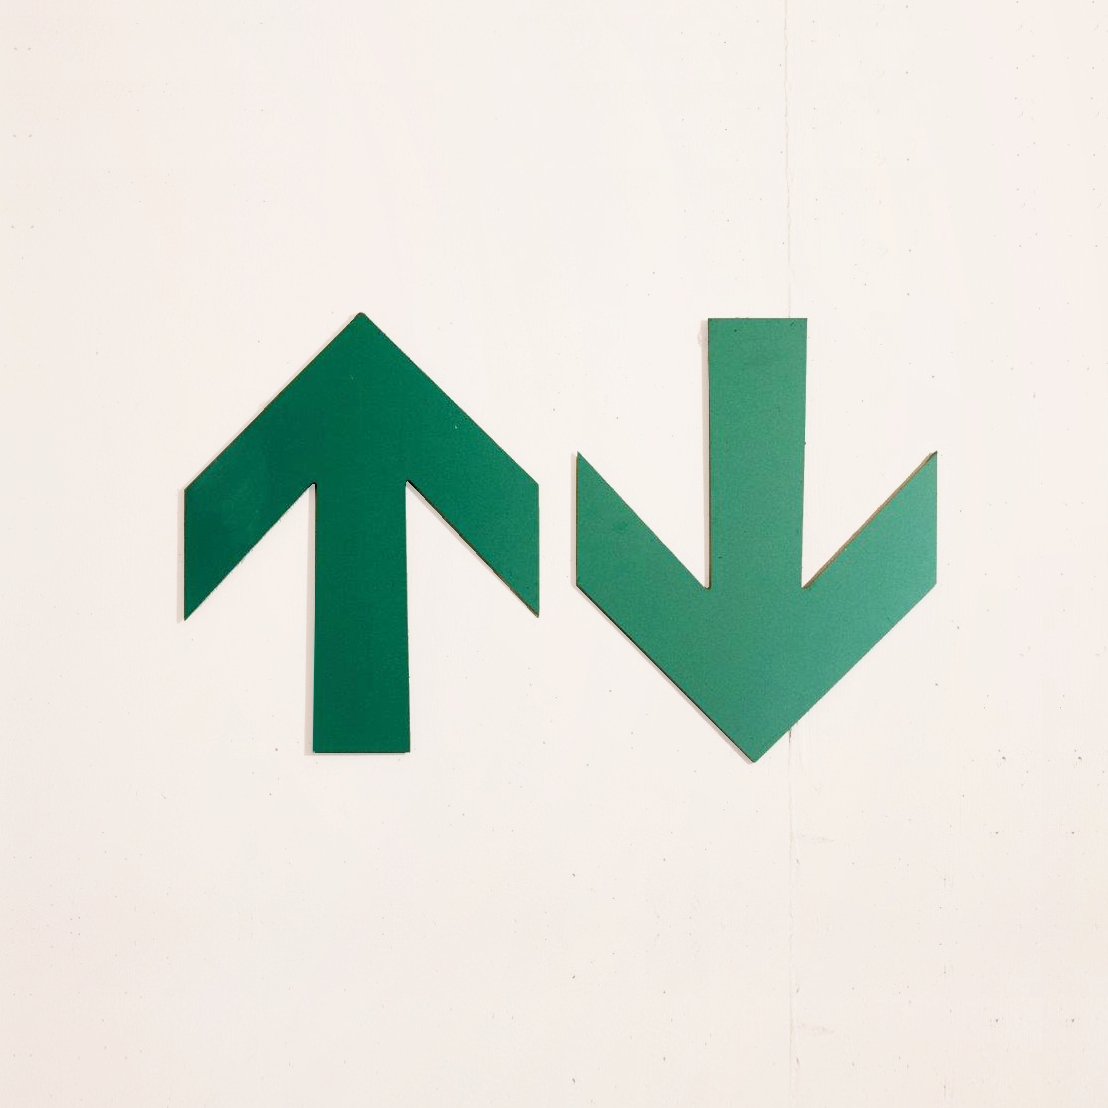 Two arrows: One pointing up and the other pointing down.